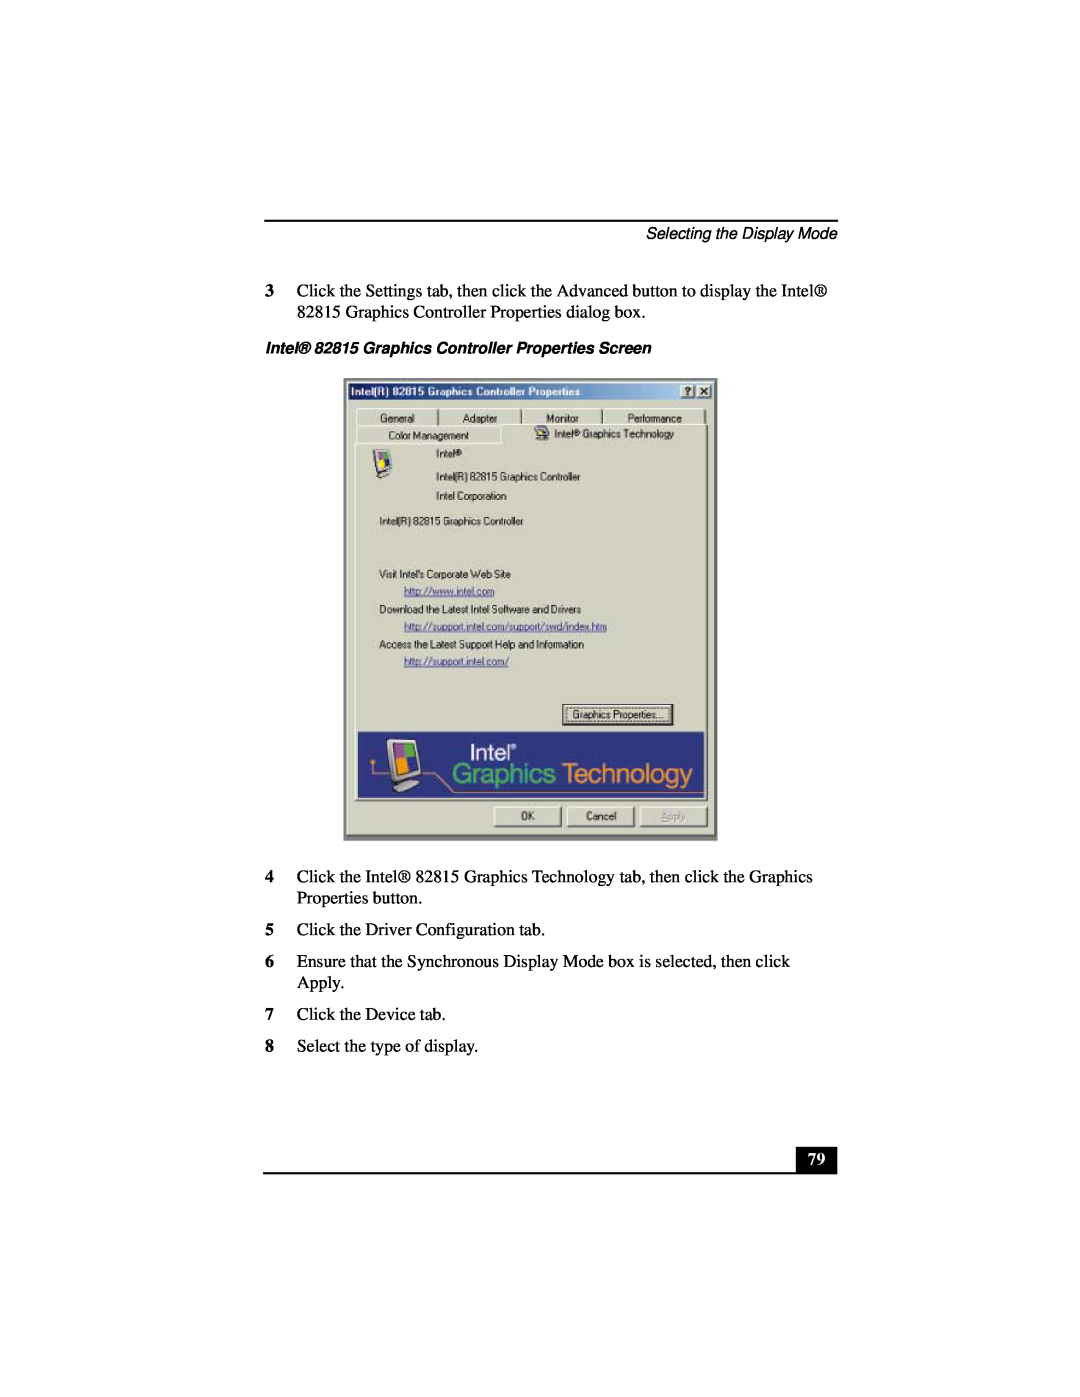 Sony Notebook Computer manual Click the Driver Configuration tab 